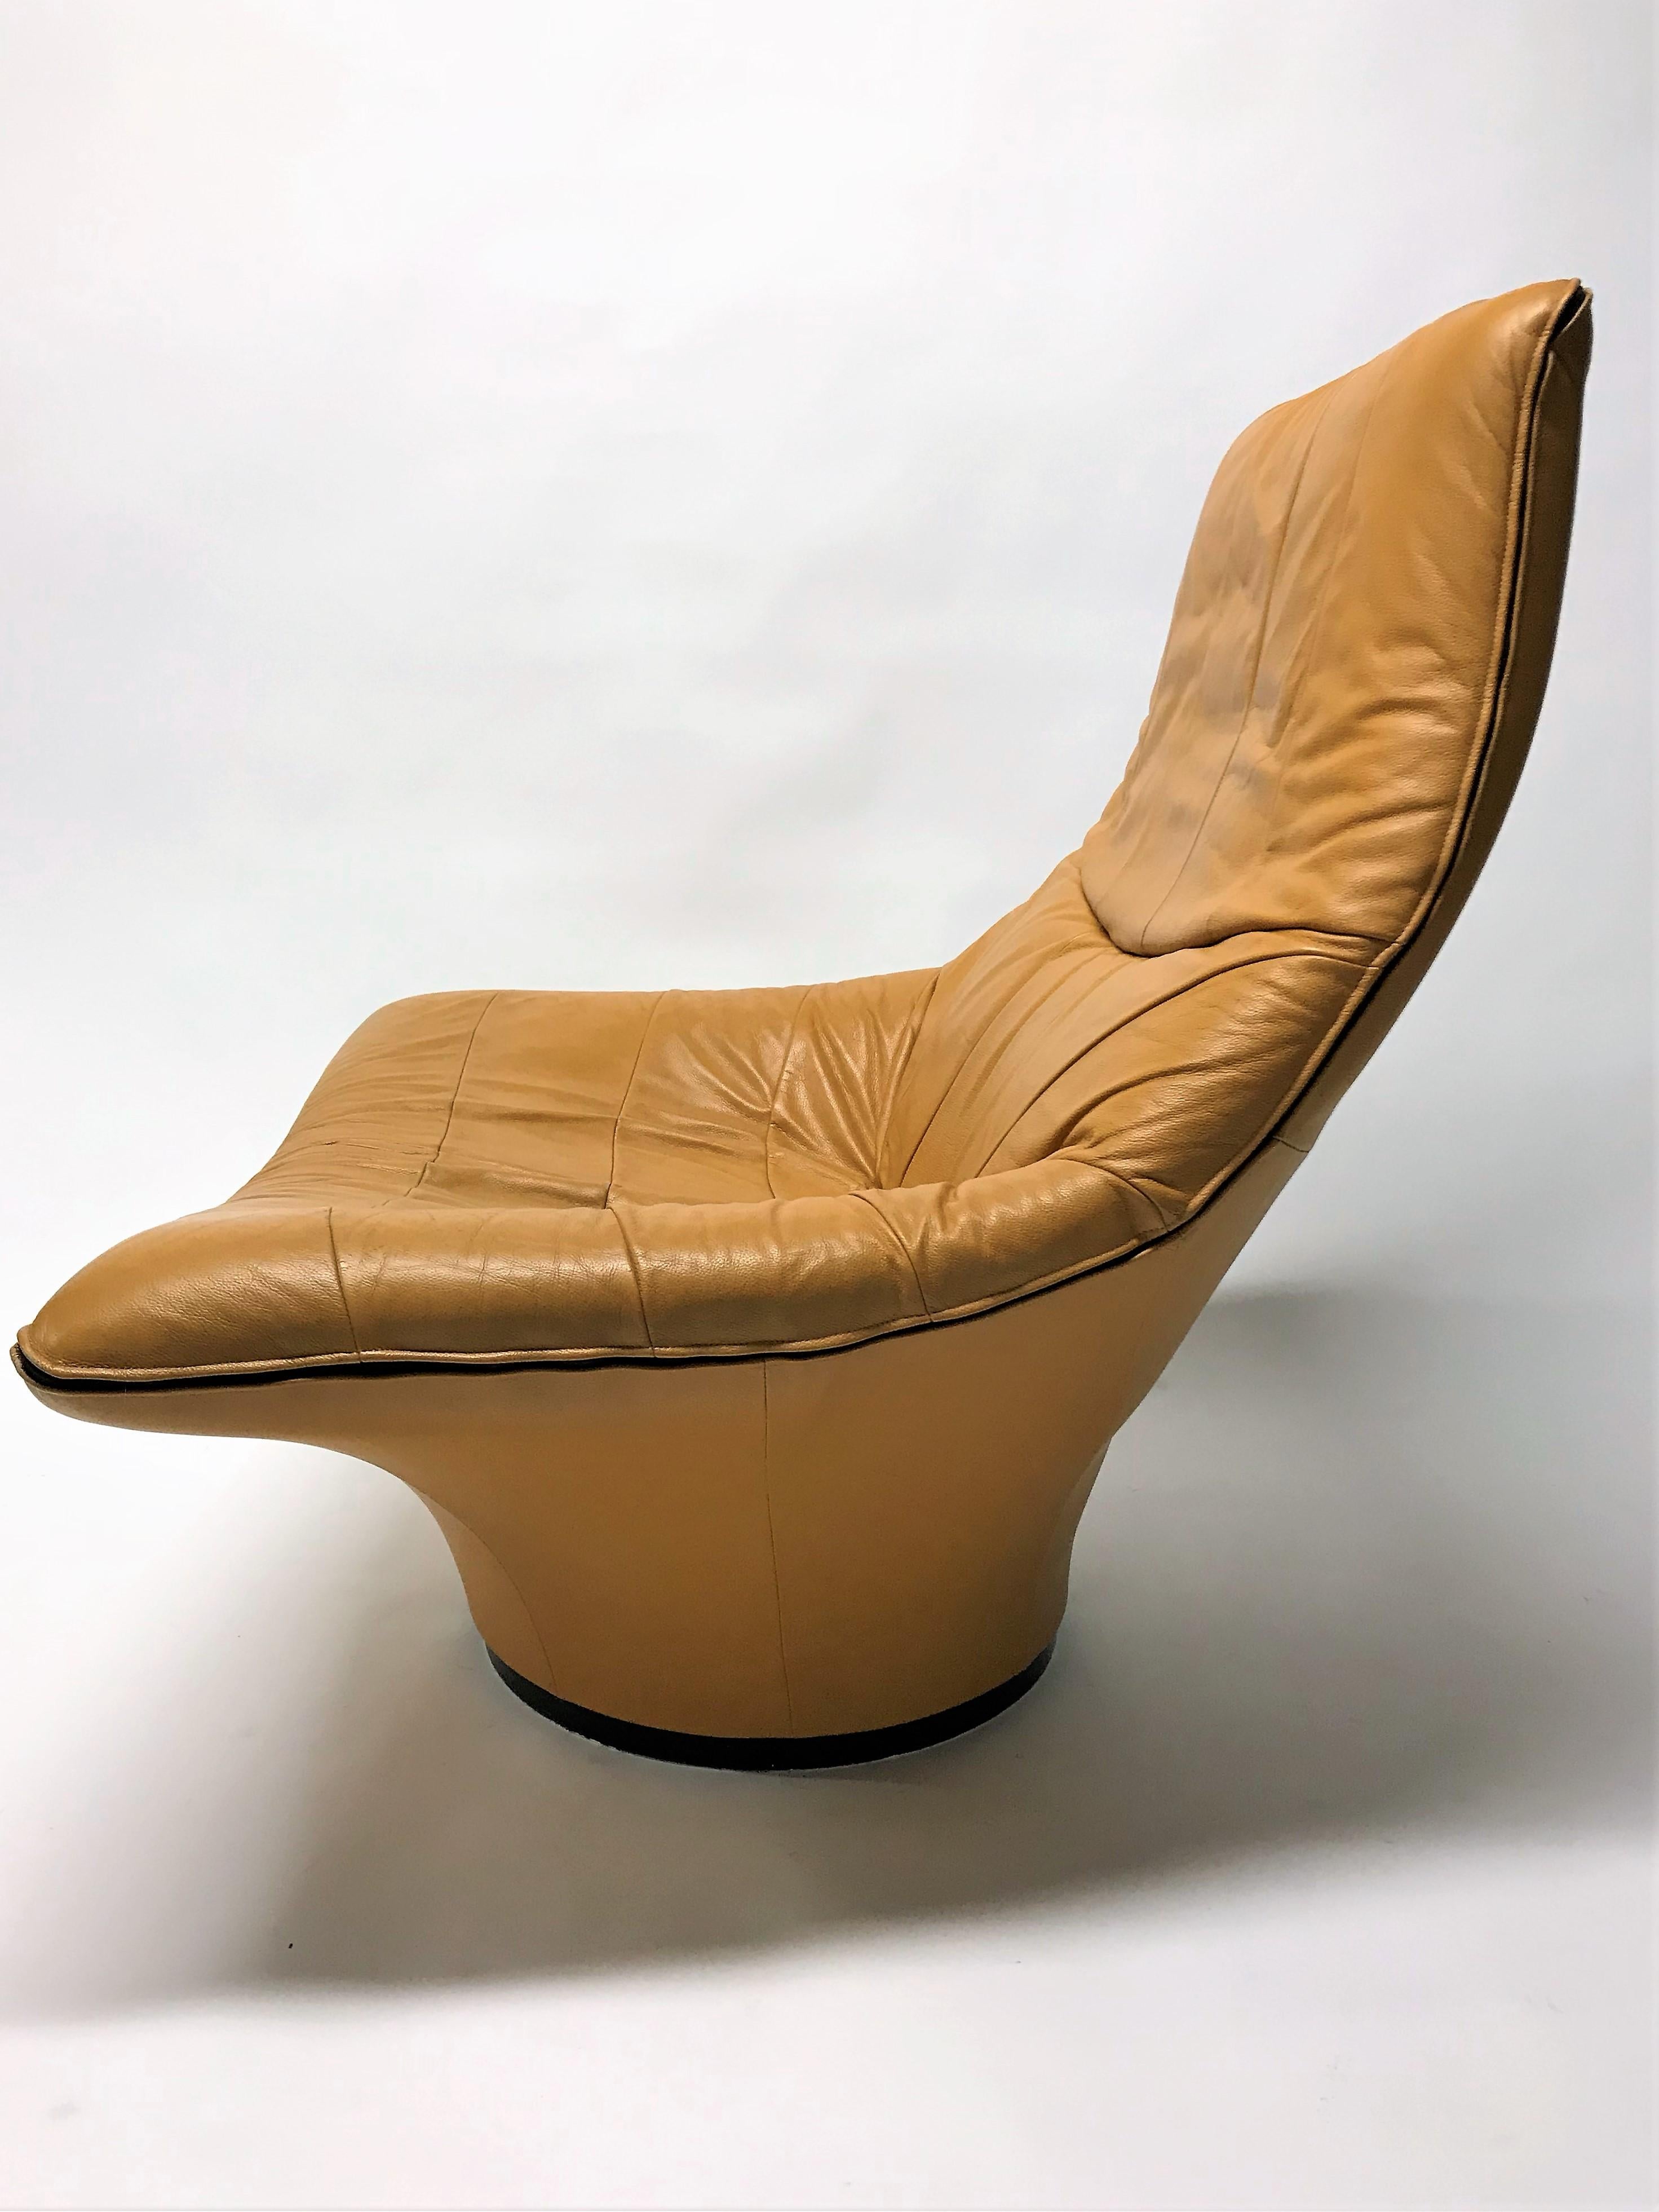 'Mantis' lounge chair in brown leather designed by Gerard Van Den Berg for Montis.

The chair sits incredibly comfortable.

Smart and beautiful timeless design.

1970s, The Netherlands.

Good condition

Dimensions:
Height